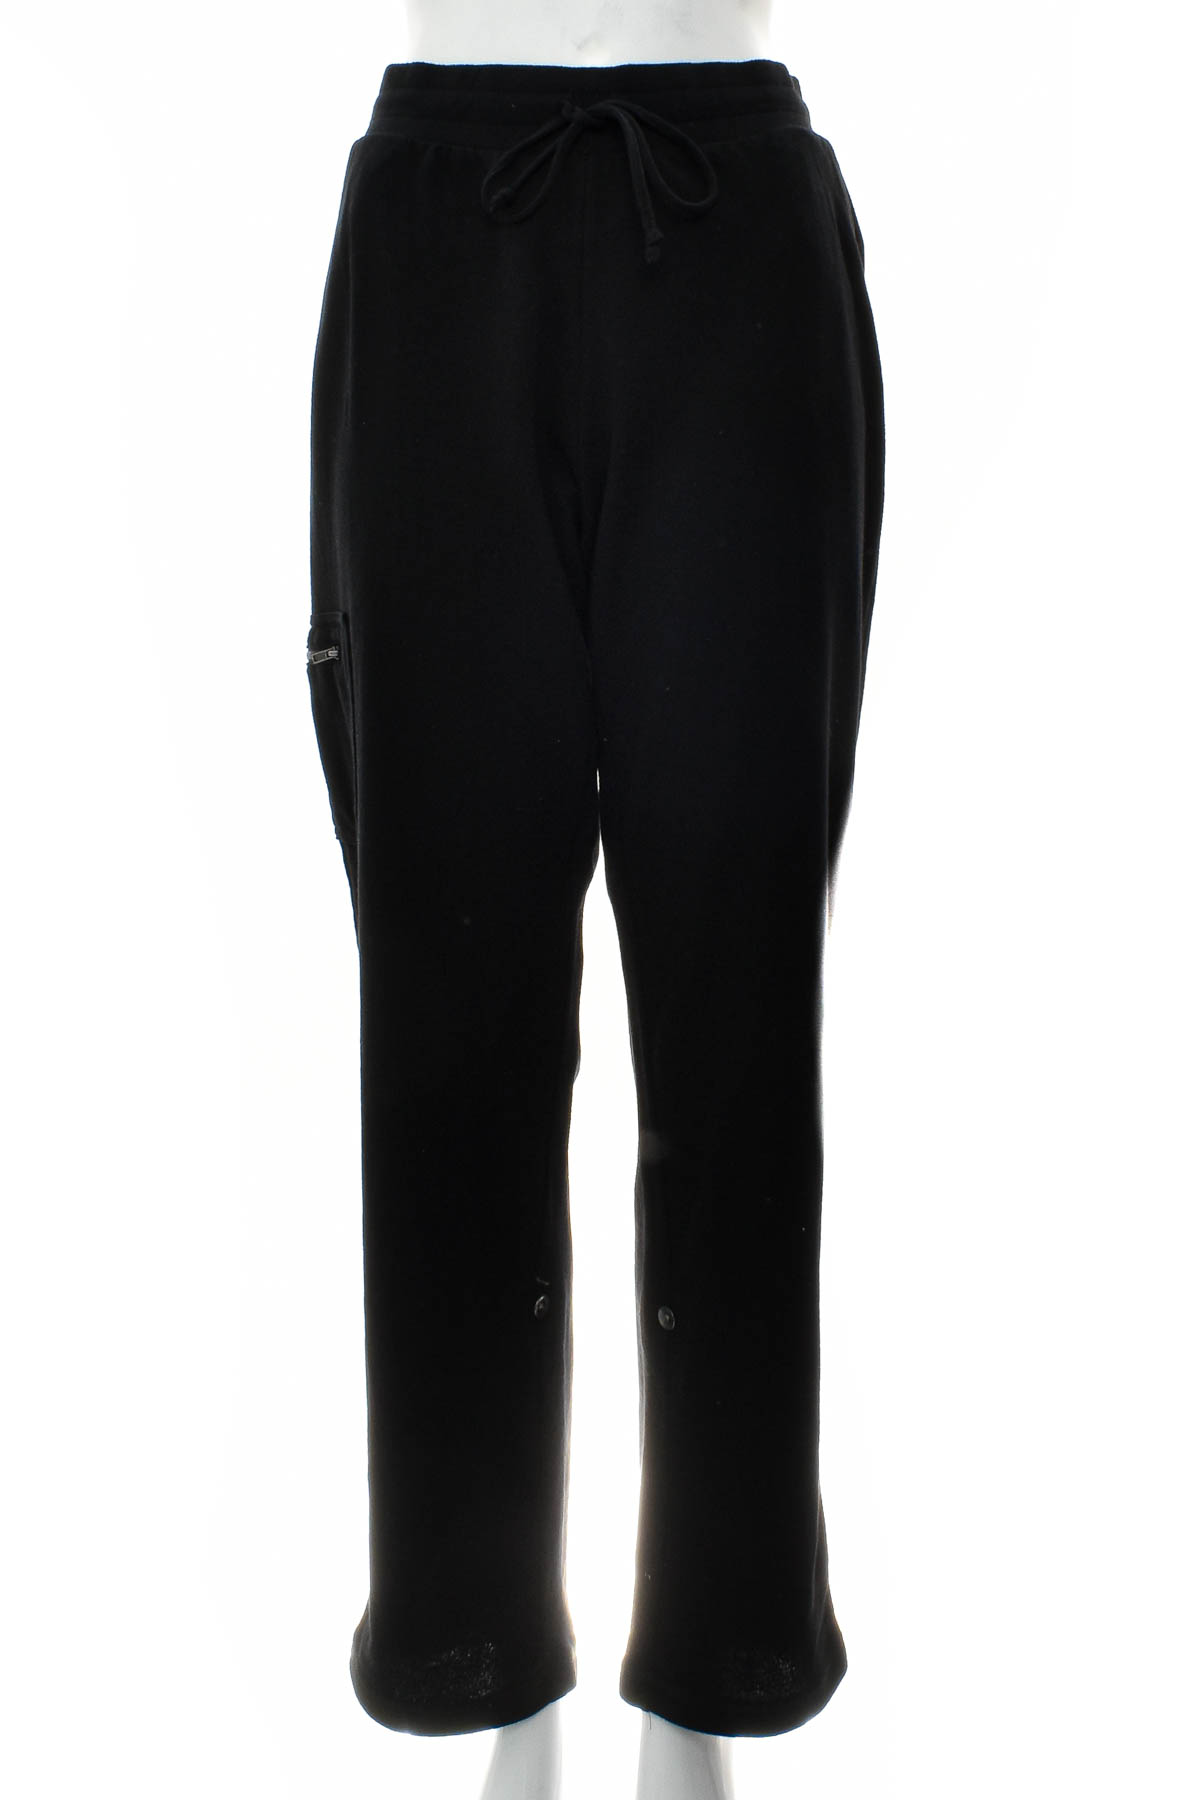 Women's trousers - SONOMA LIFE + STYLE - 0